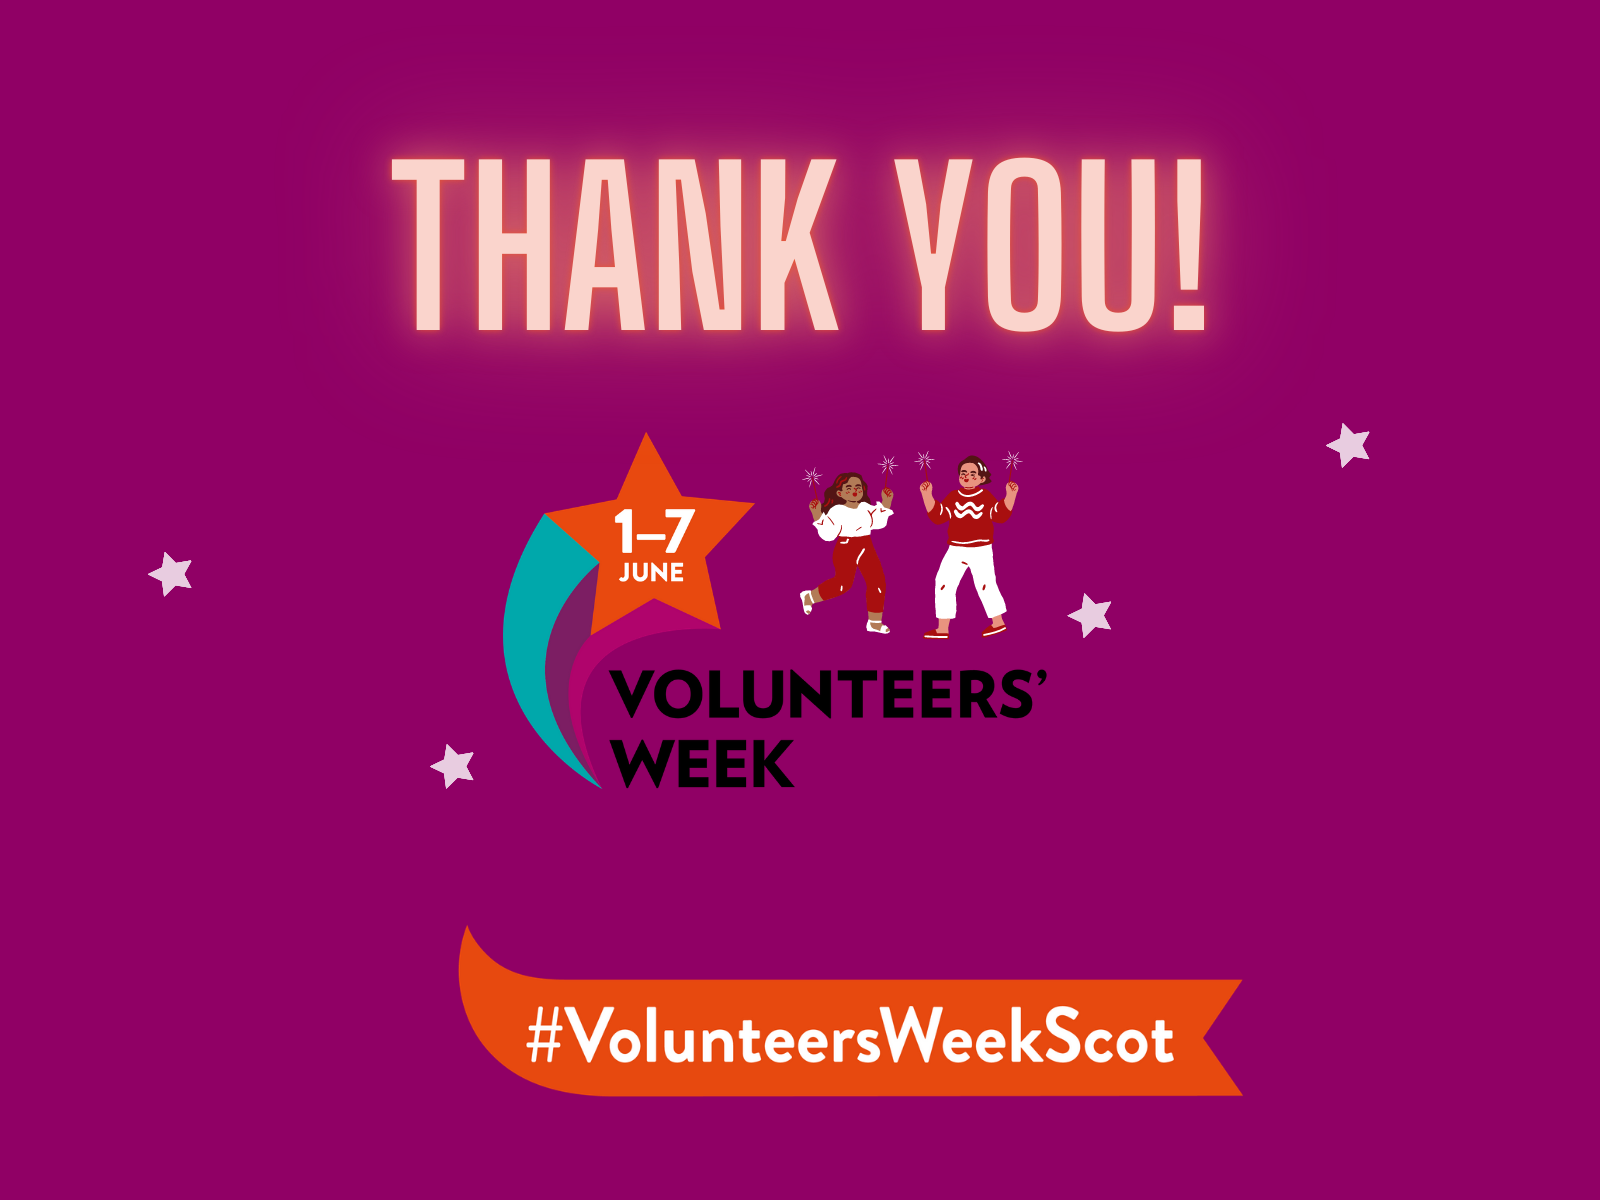  » A TIME TO SAY THANK YOU: CELEBRATING VOLUNTEERS WEEK 2021!